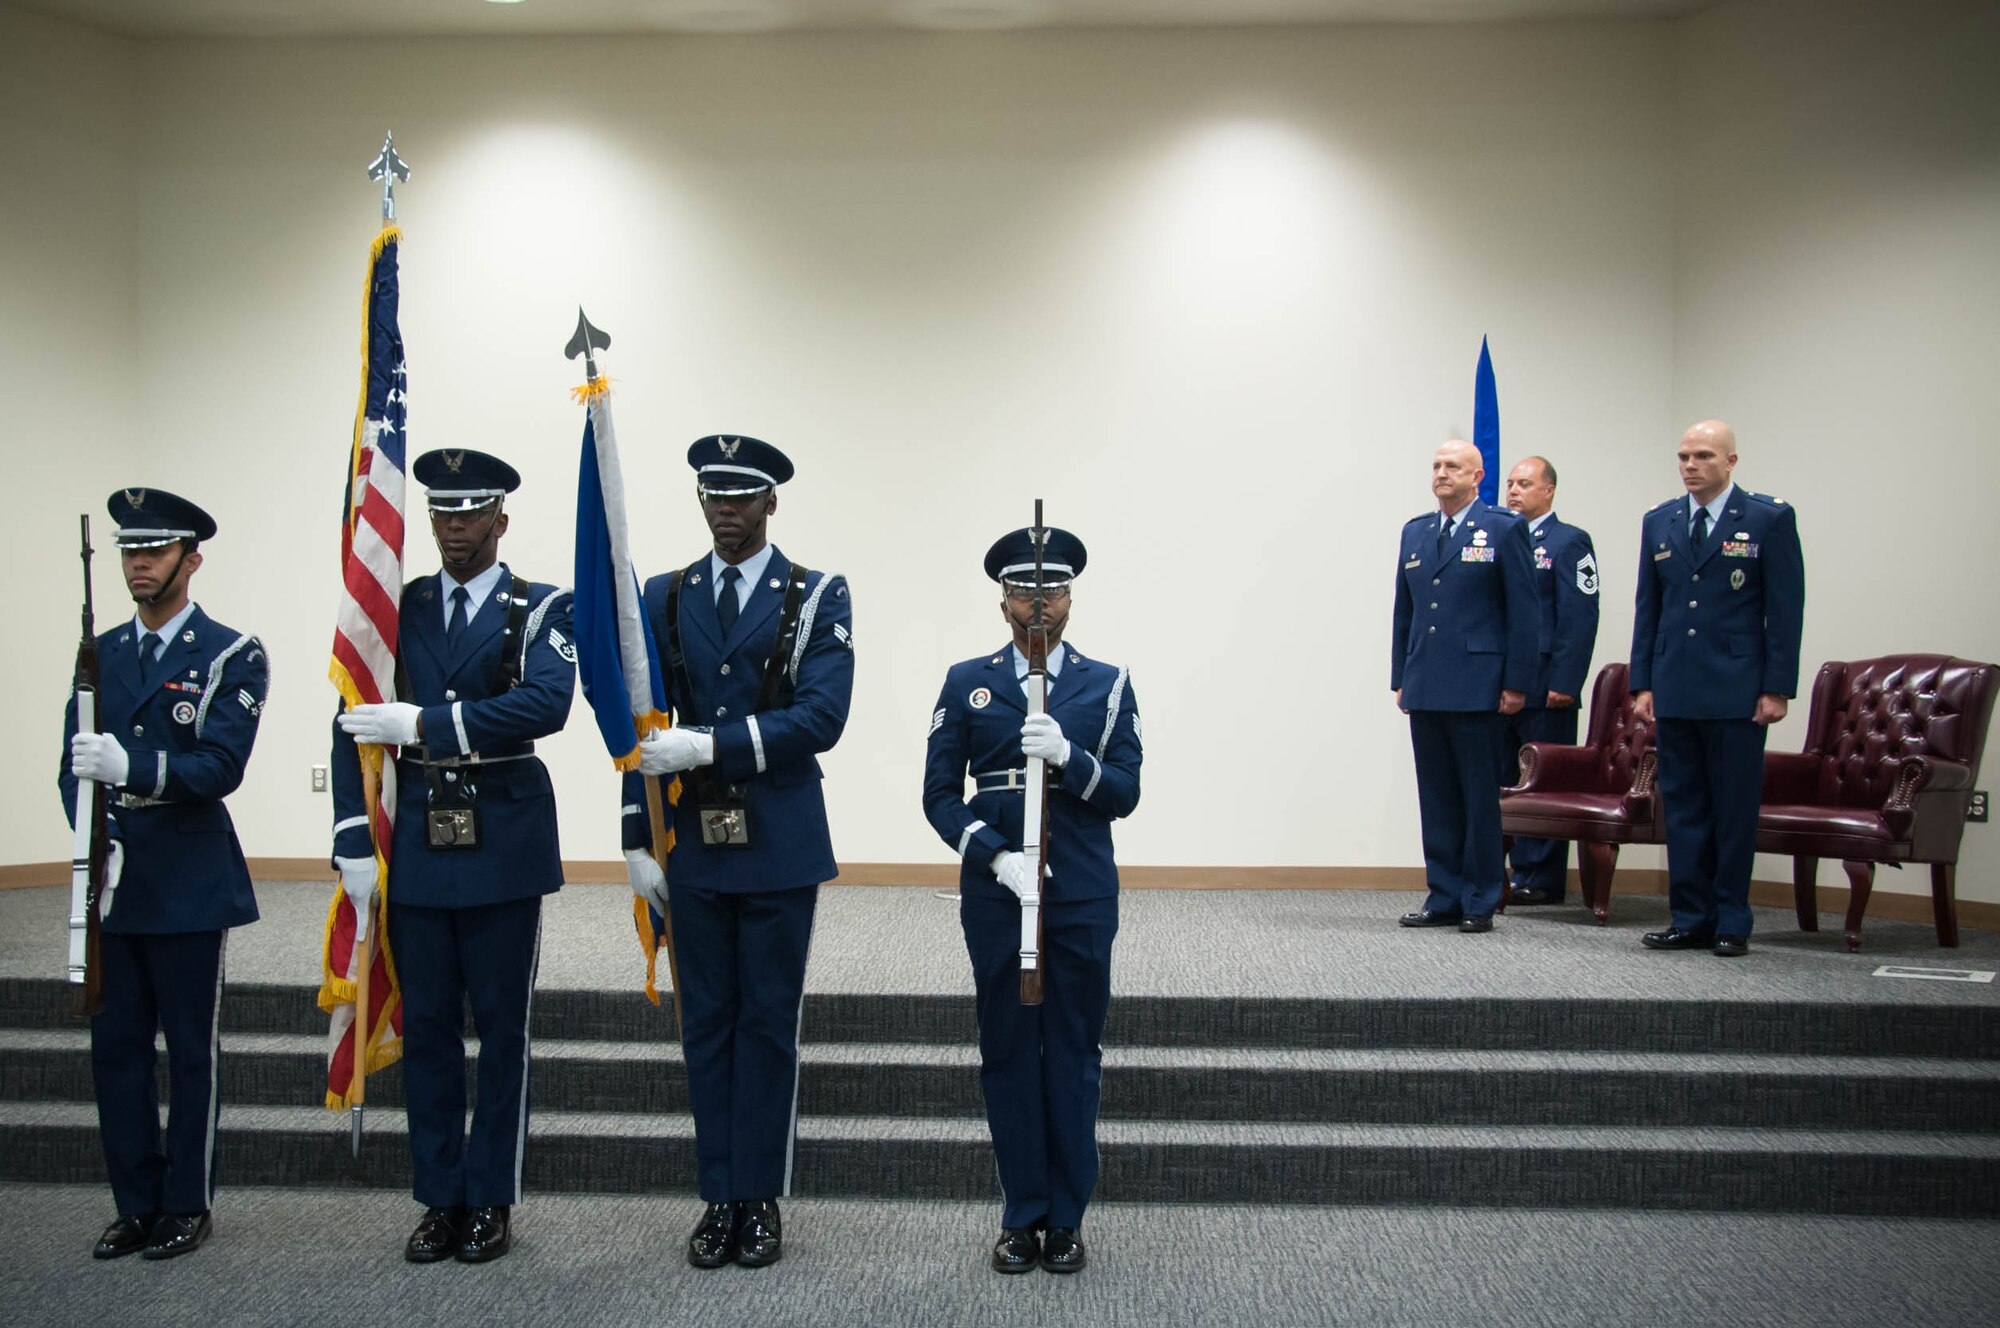 Keesler Air Force Base Honor Guard members post the colors during a ceremony to activate the new 803rd Maintenance Squadron Sept. 11. (U.S. Air Force photo/Senior Airman Heather Heiney)